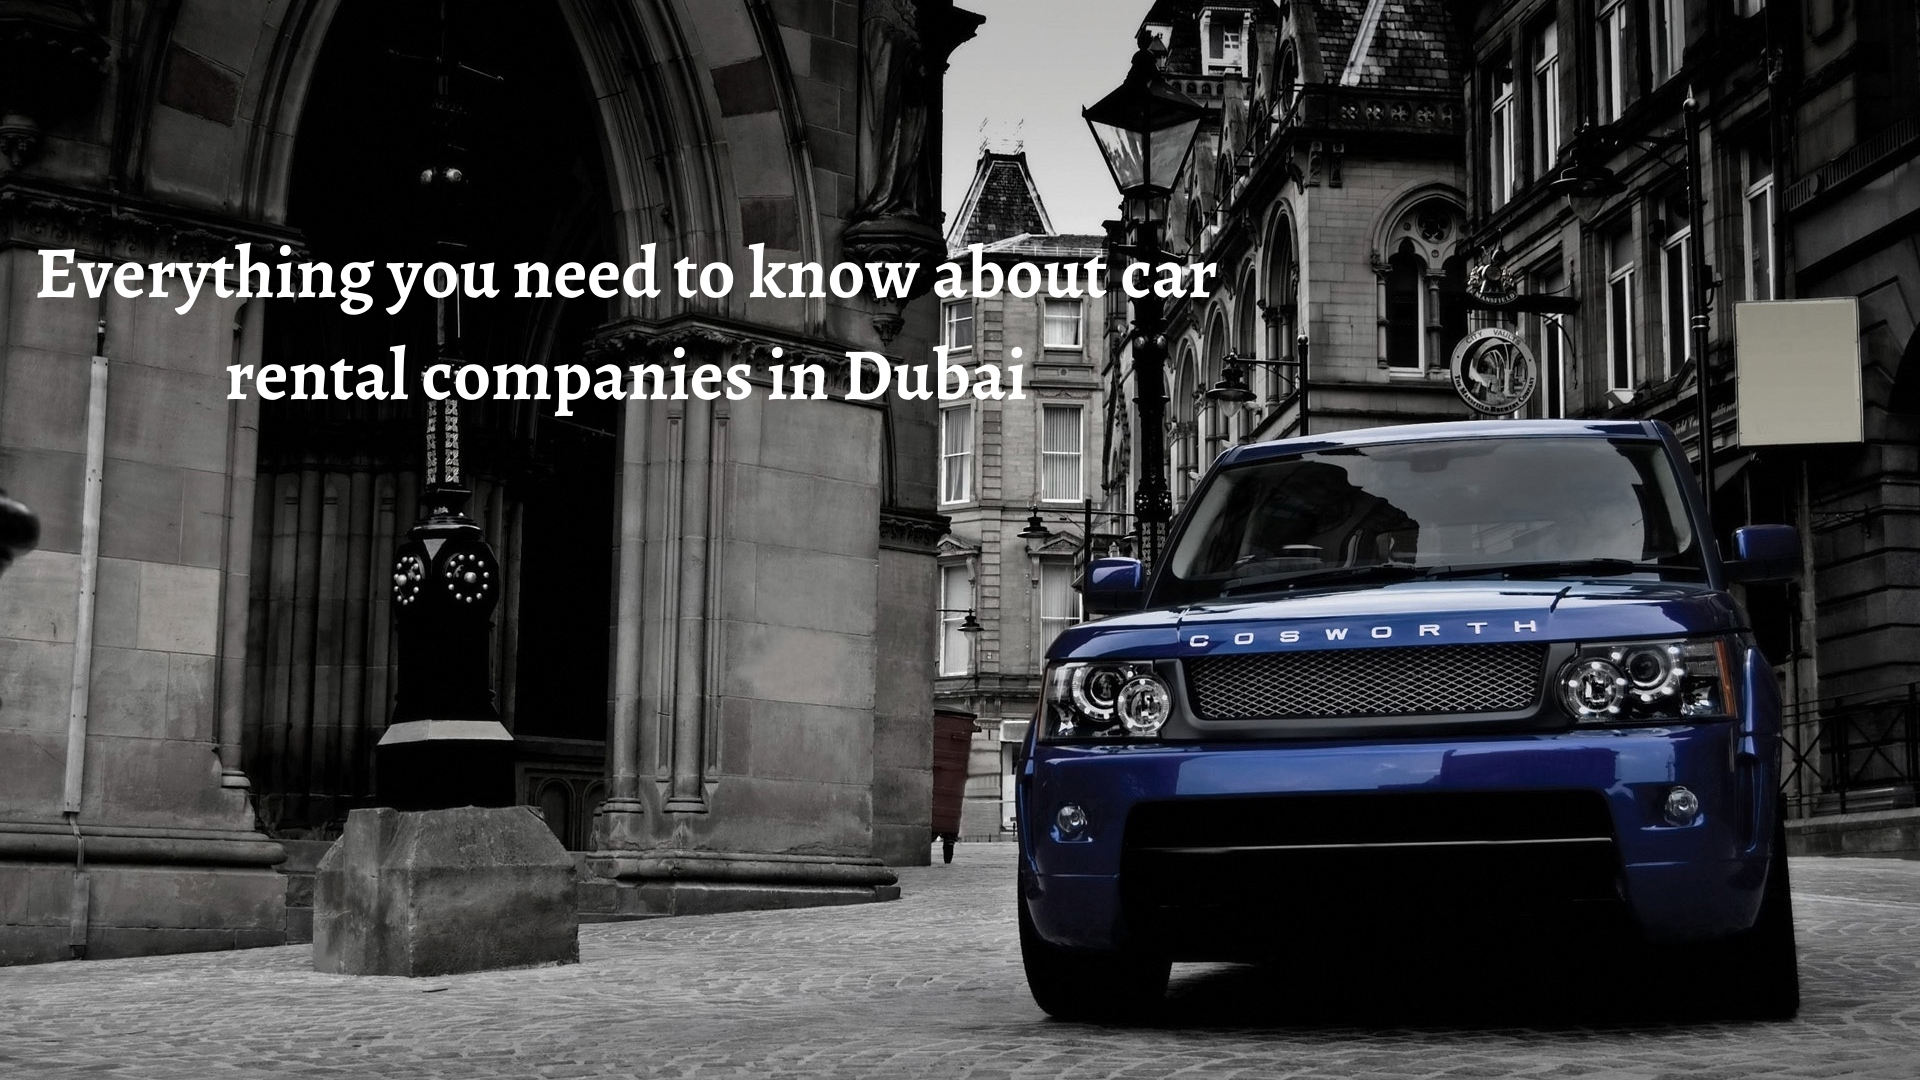 Everything you need to know about car rental companies in Dubai